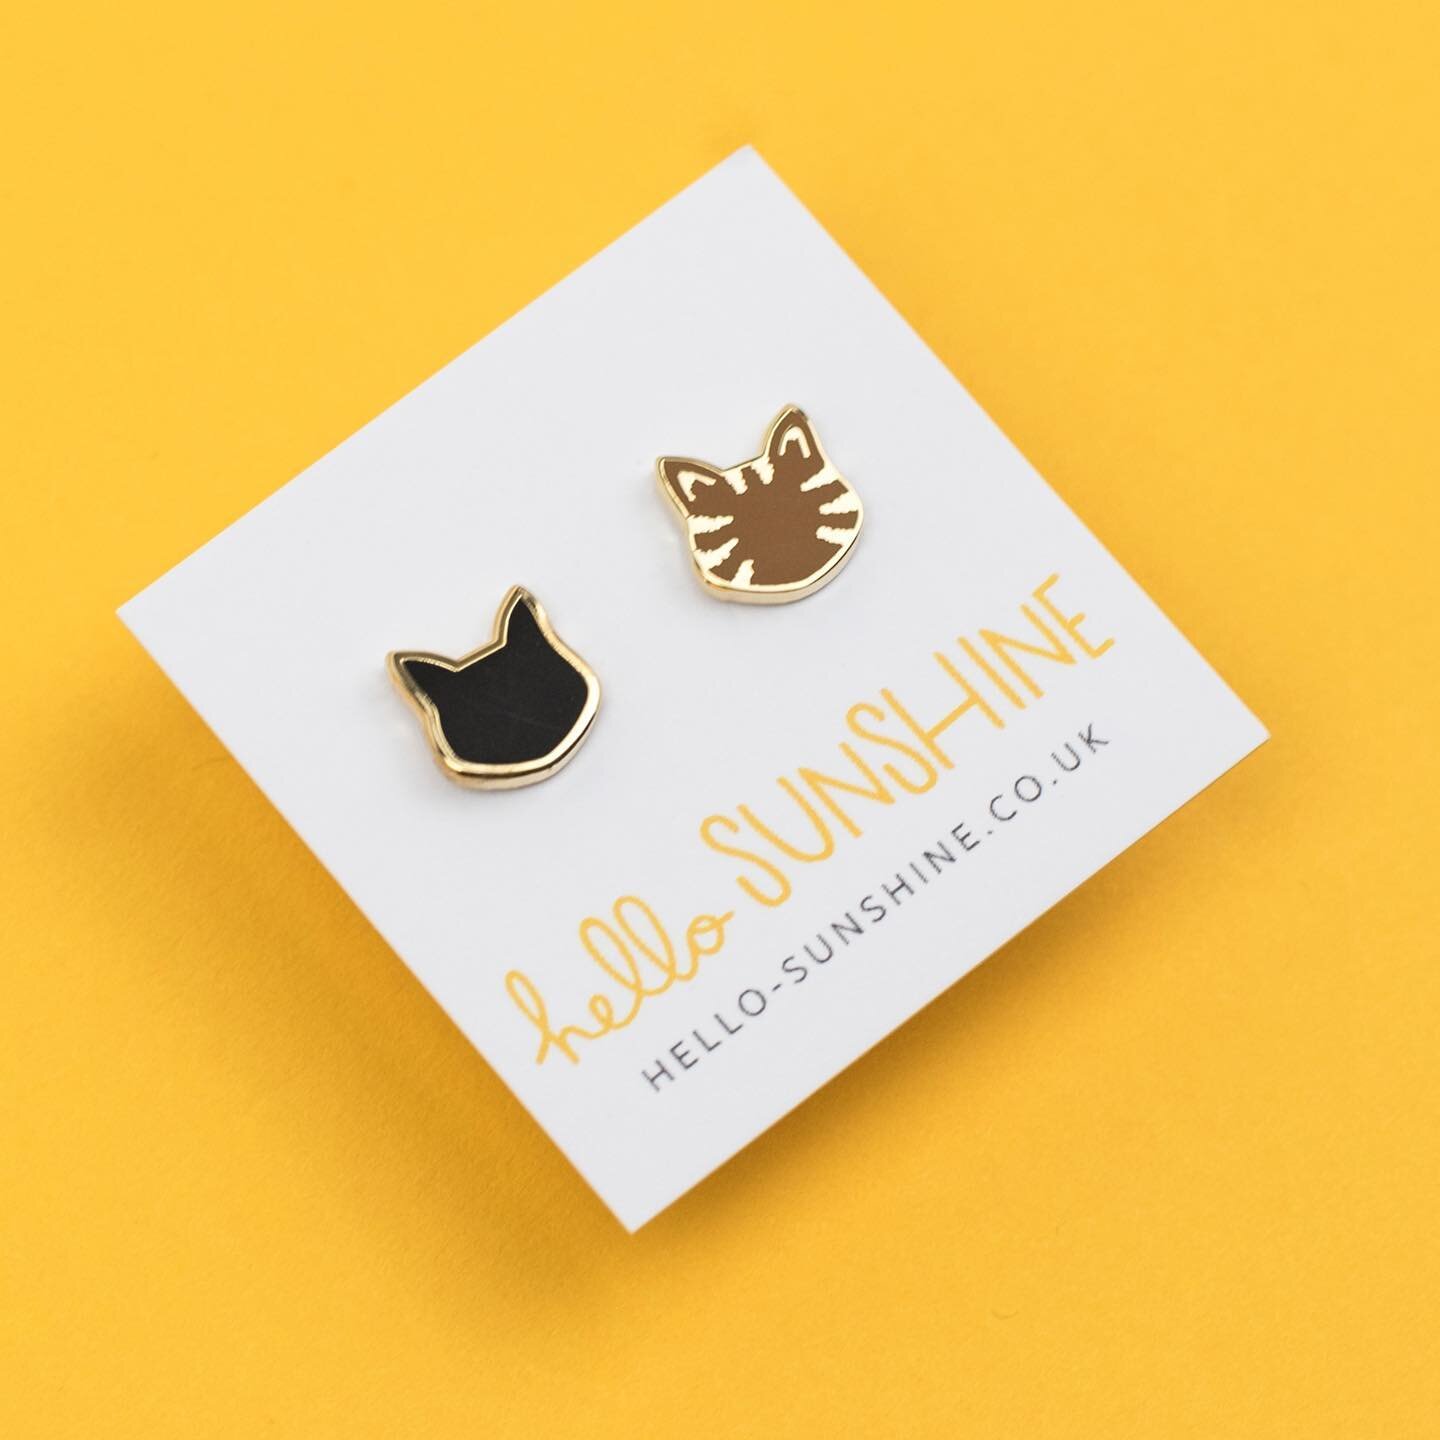 Eeep! I love it when people request a teeny-tiny Toby and Pegs earring combo 💛